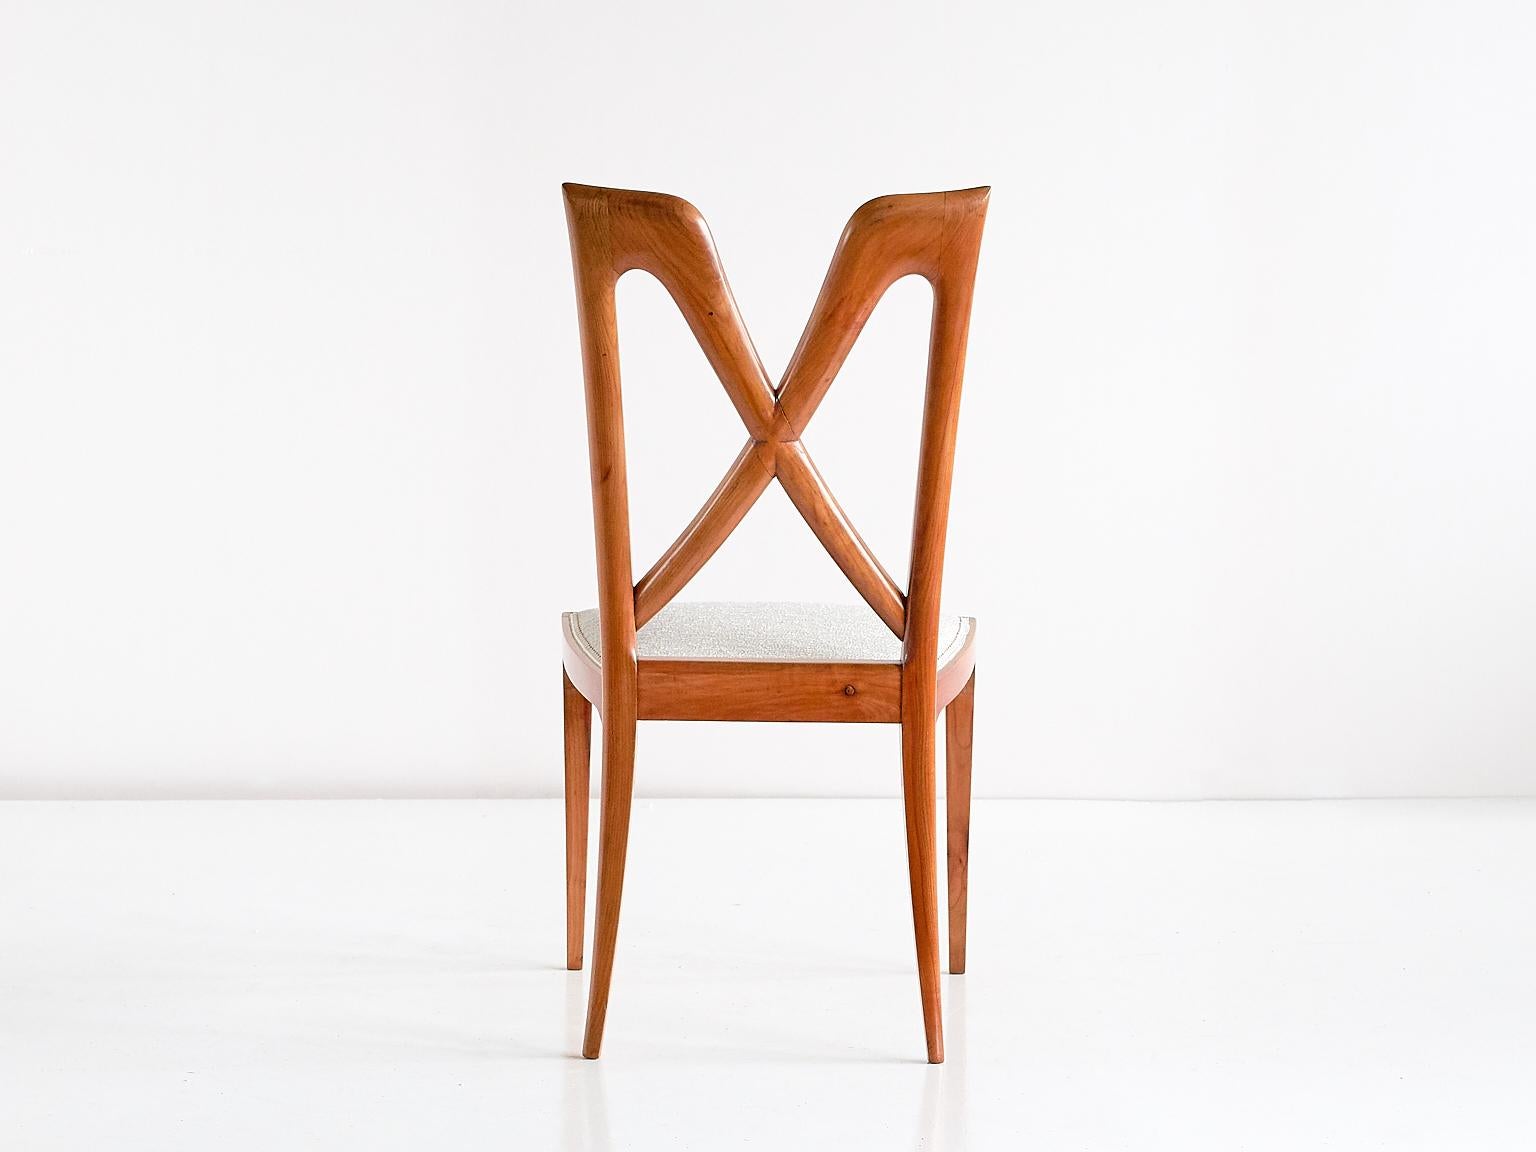 Set of Six Ulderico Carlo Forni Dining Chairs in Cherry Wood, Italy, 1940s For Sale 2